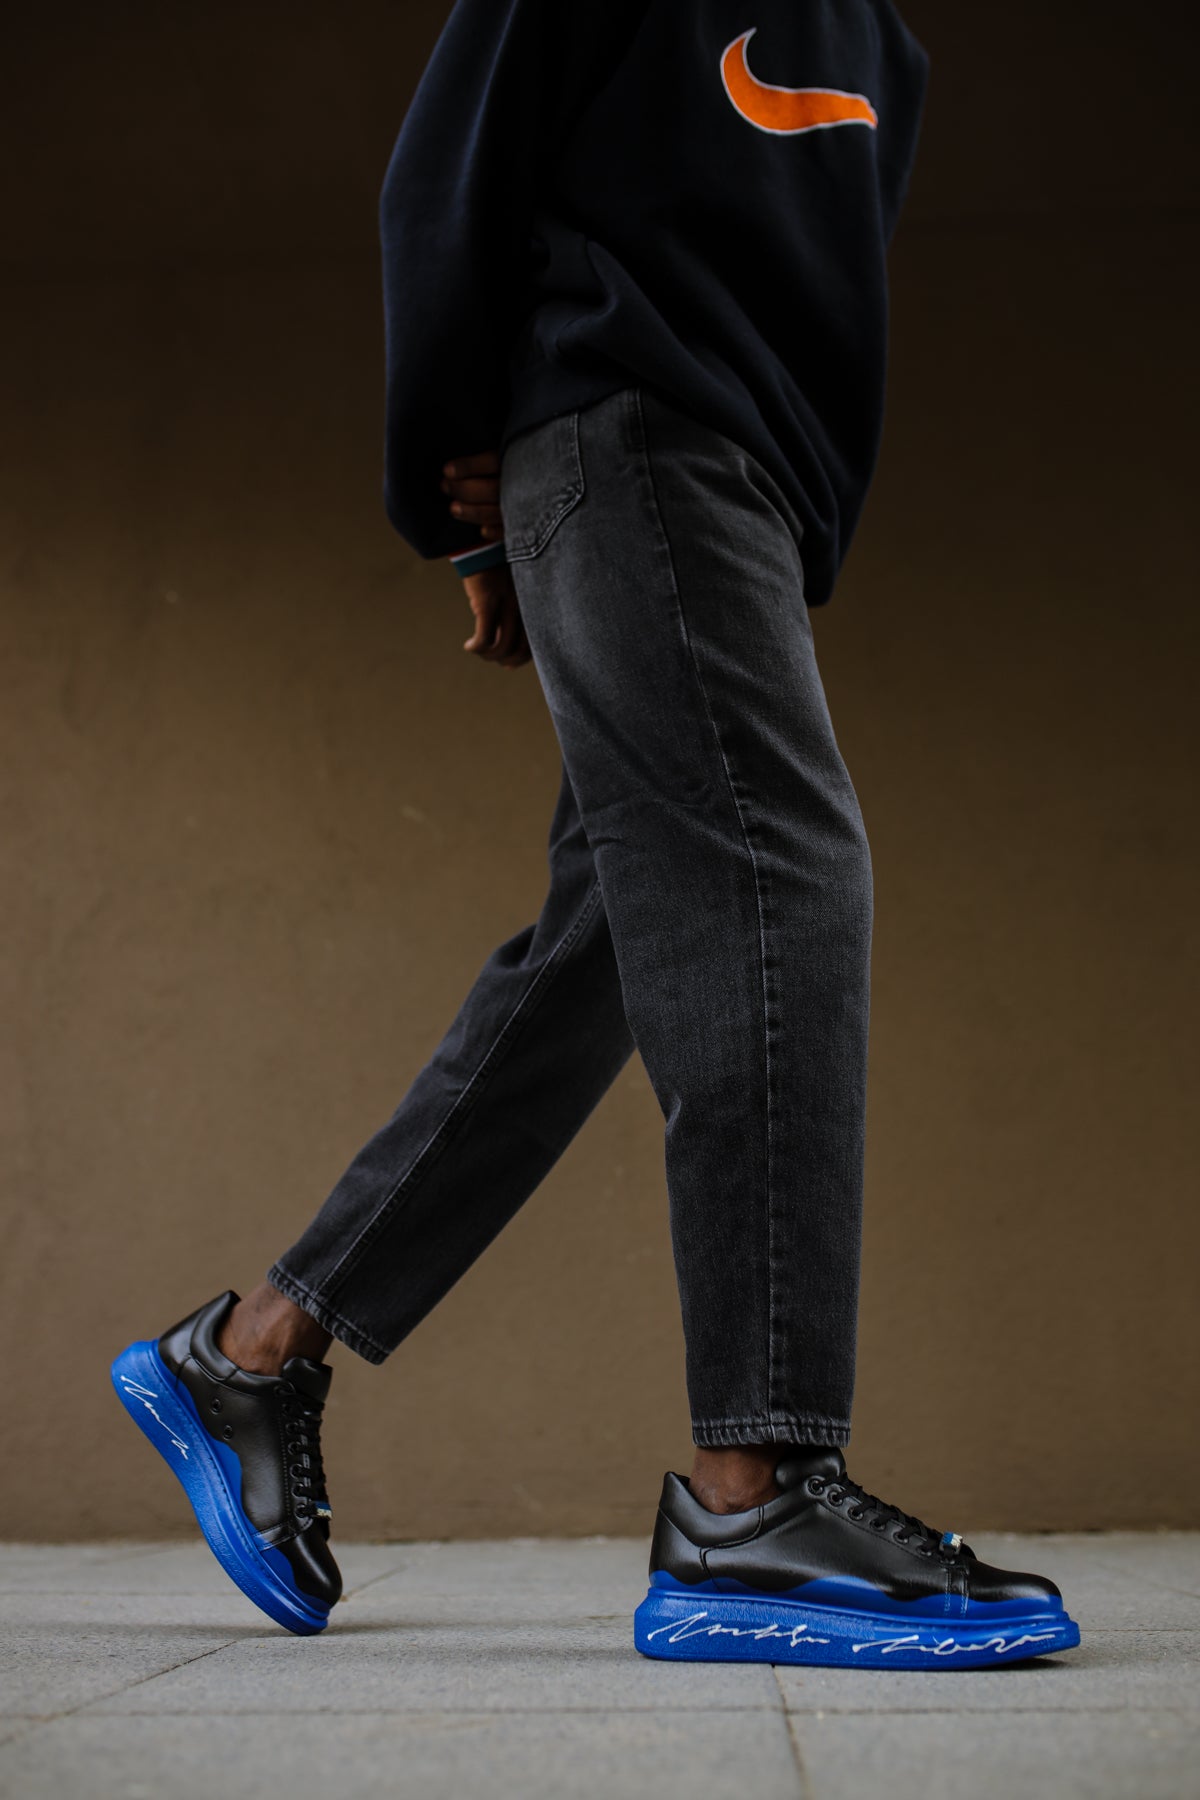 Rogue Navy Blue - Swagg Splash Sneakers